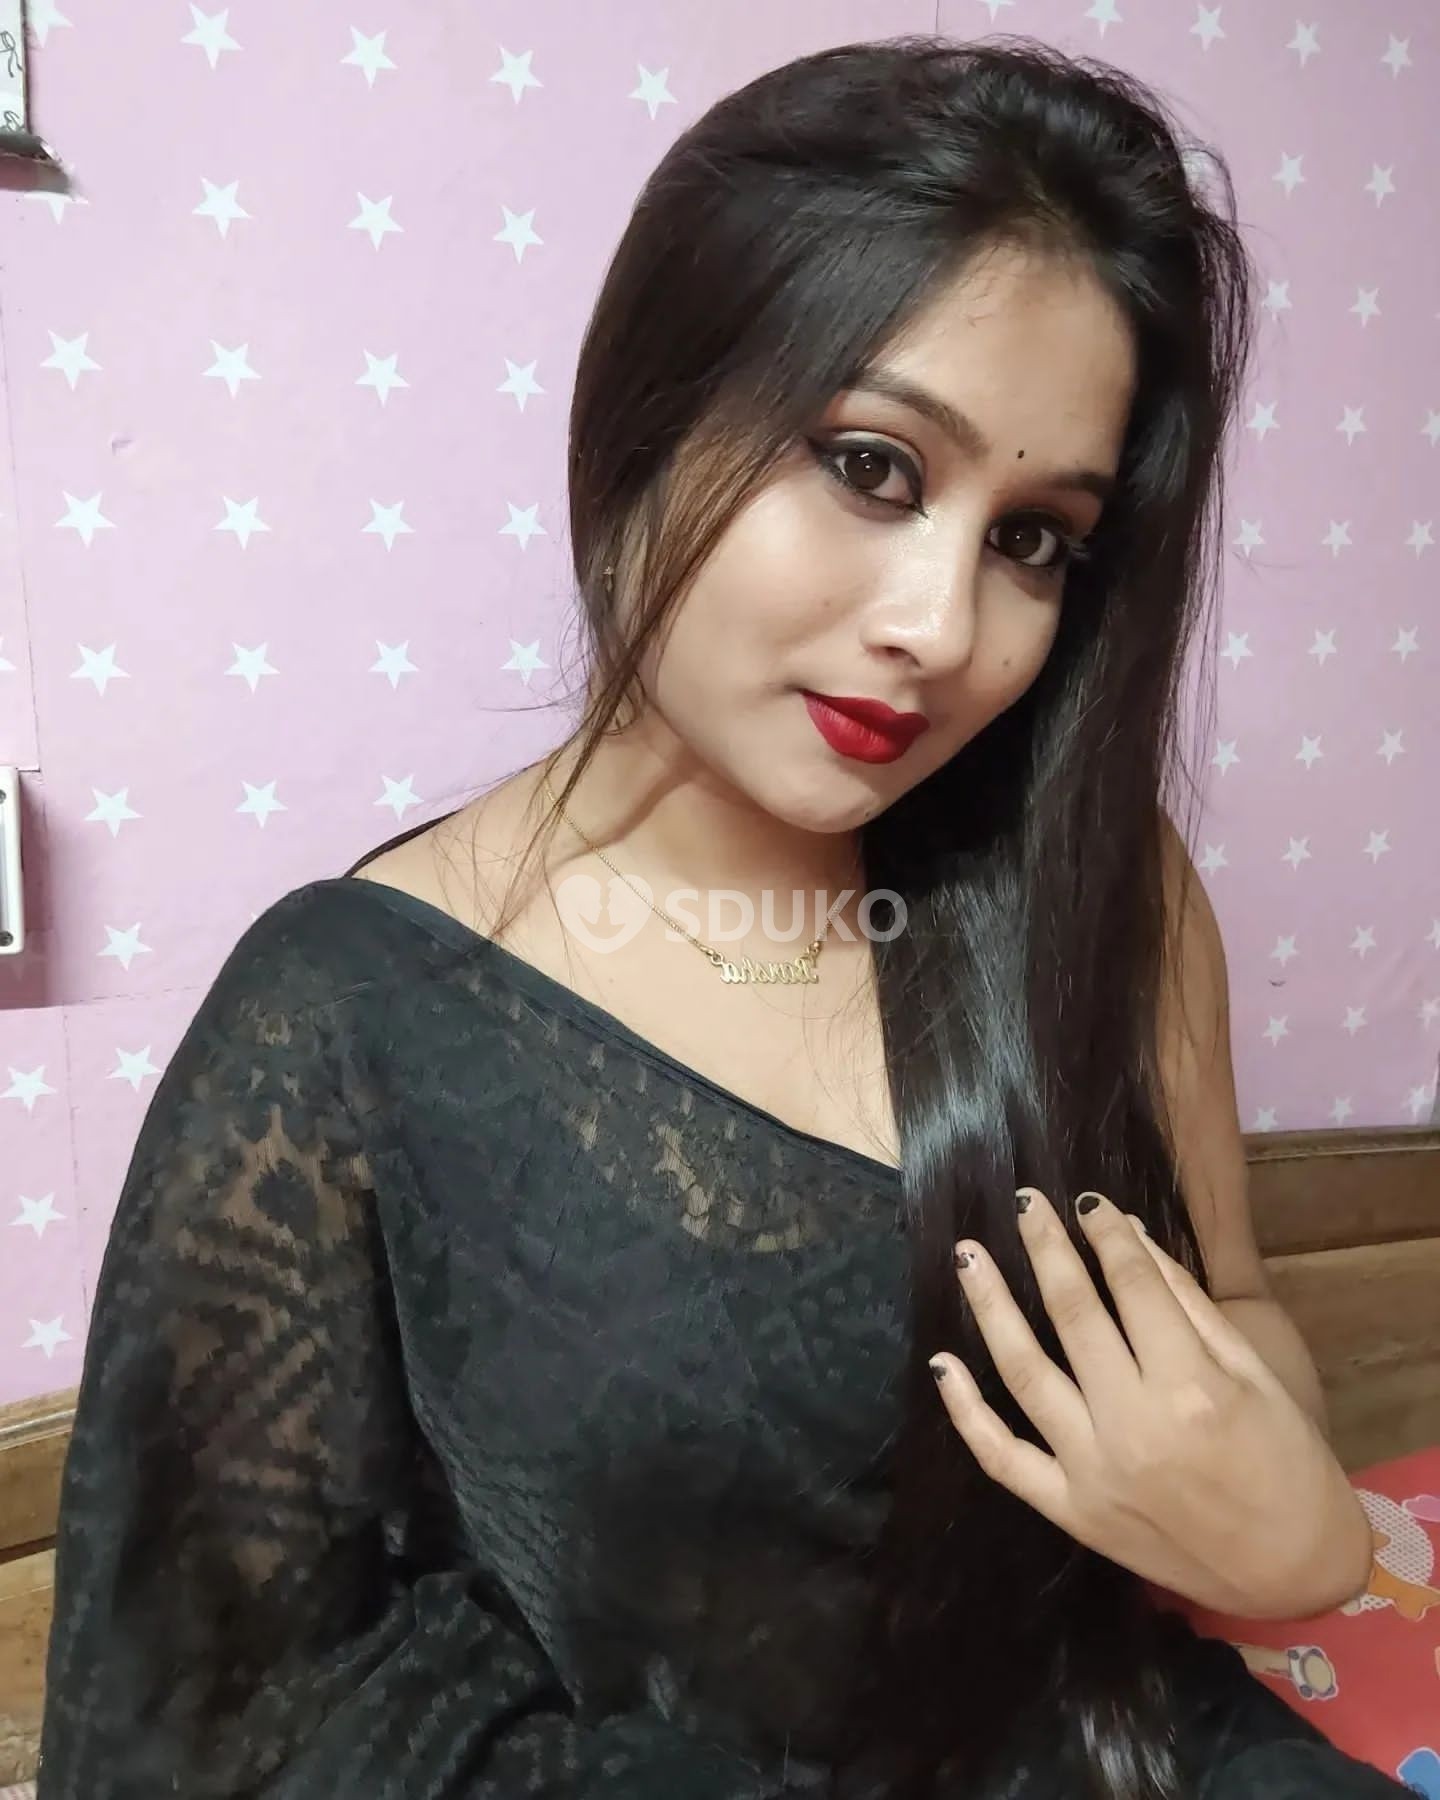 NASHIK 🆑 TODAY LOW PRICE 100% SAFE AND SECURE GENUINE CALL GIRL AFFORDABLE PRICE CALL NOW 24/7 AVAILABLE ANYTIME CALL